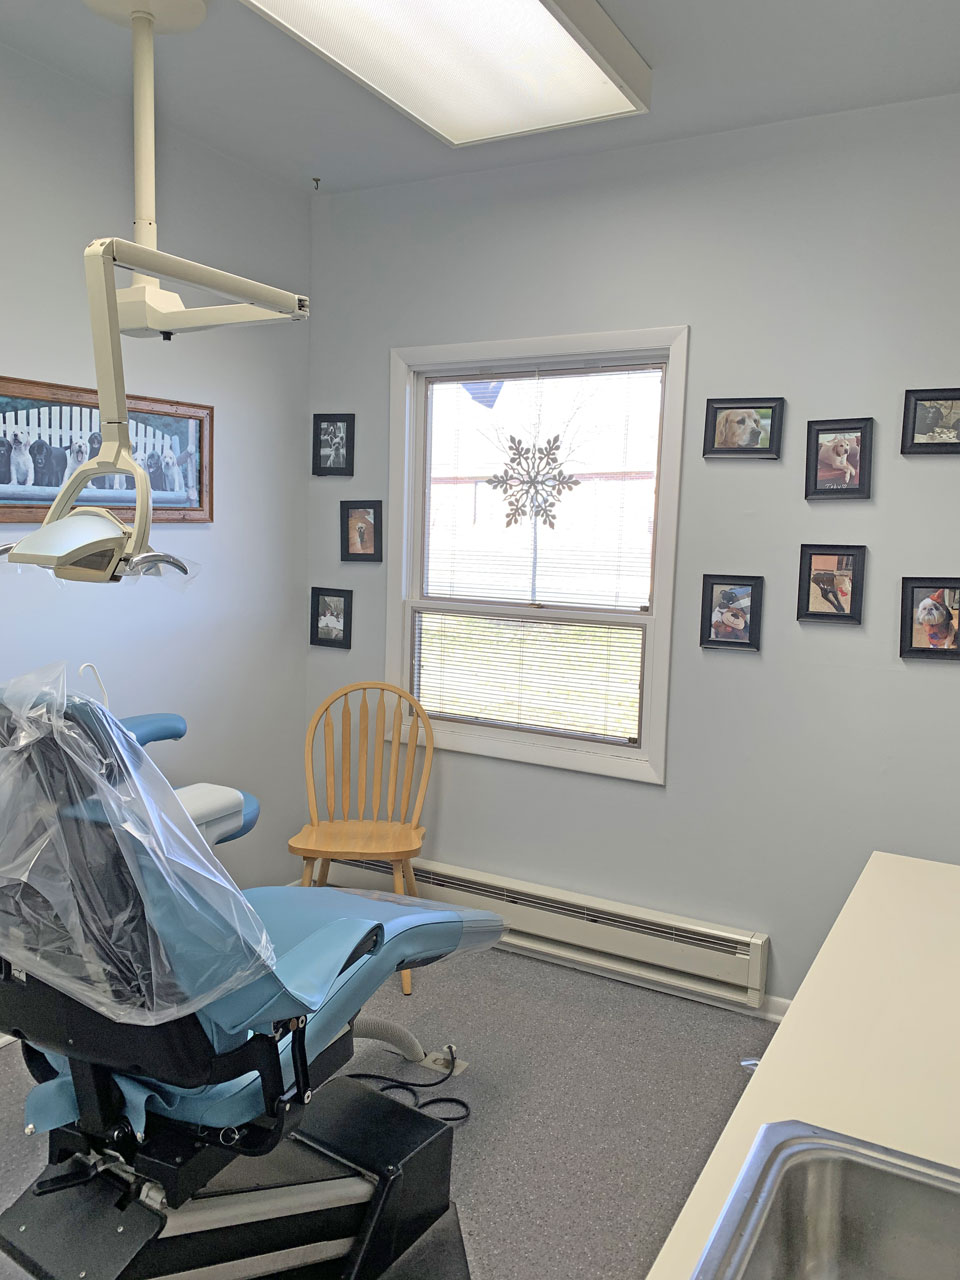 Mark Danner DMD Family Dentistry dental chair and supplies